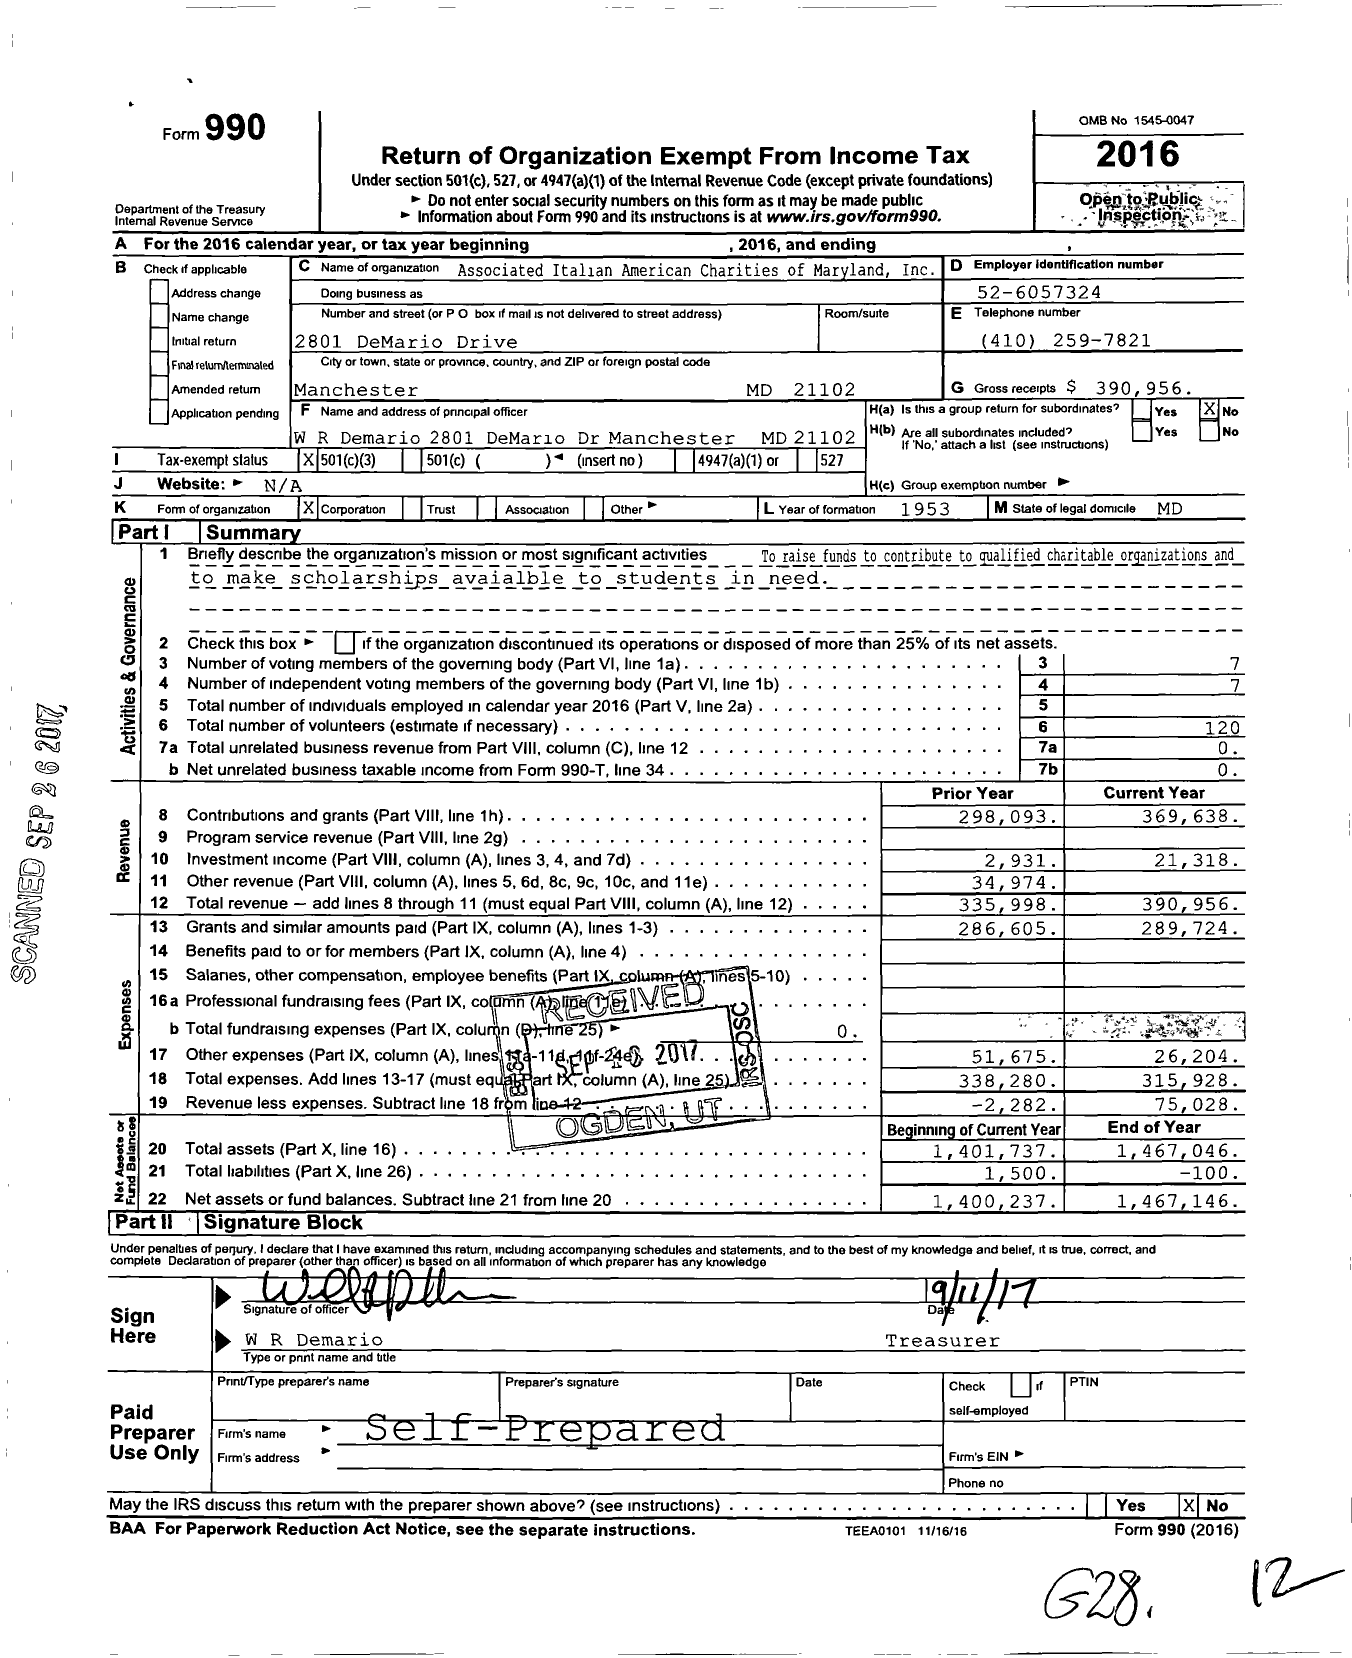 Image of first page of 2016 Form 990 for Associated Italian American Charities of Maryland